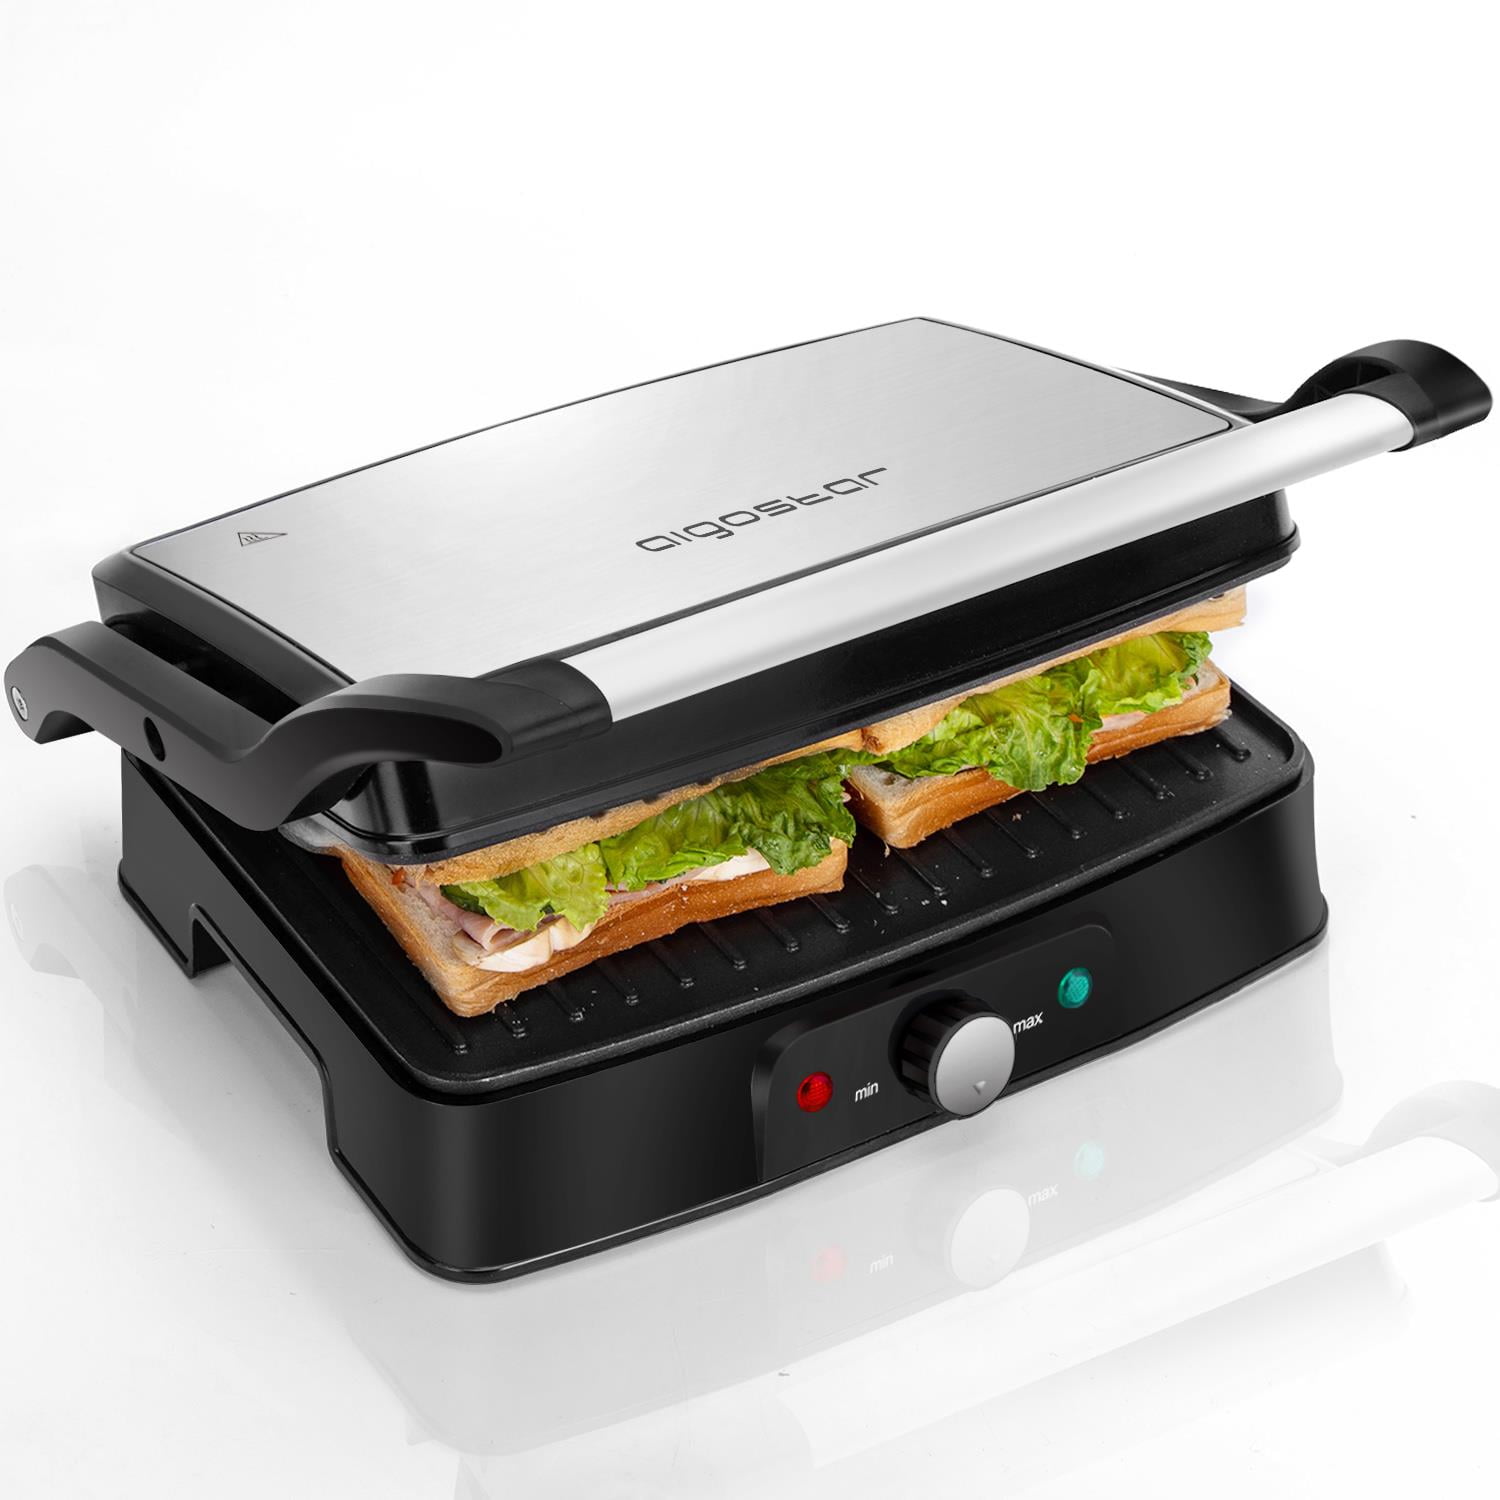 1200W 4 Slice Non-stick Versatile Grill OSTBA Panini Press Grill Indoor Grill Sandwich Maker with Temperature Control Removable Drip Tray Opens 180 Degrees to Fit Any Type or Size of Food 